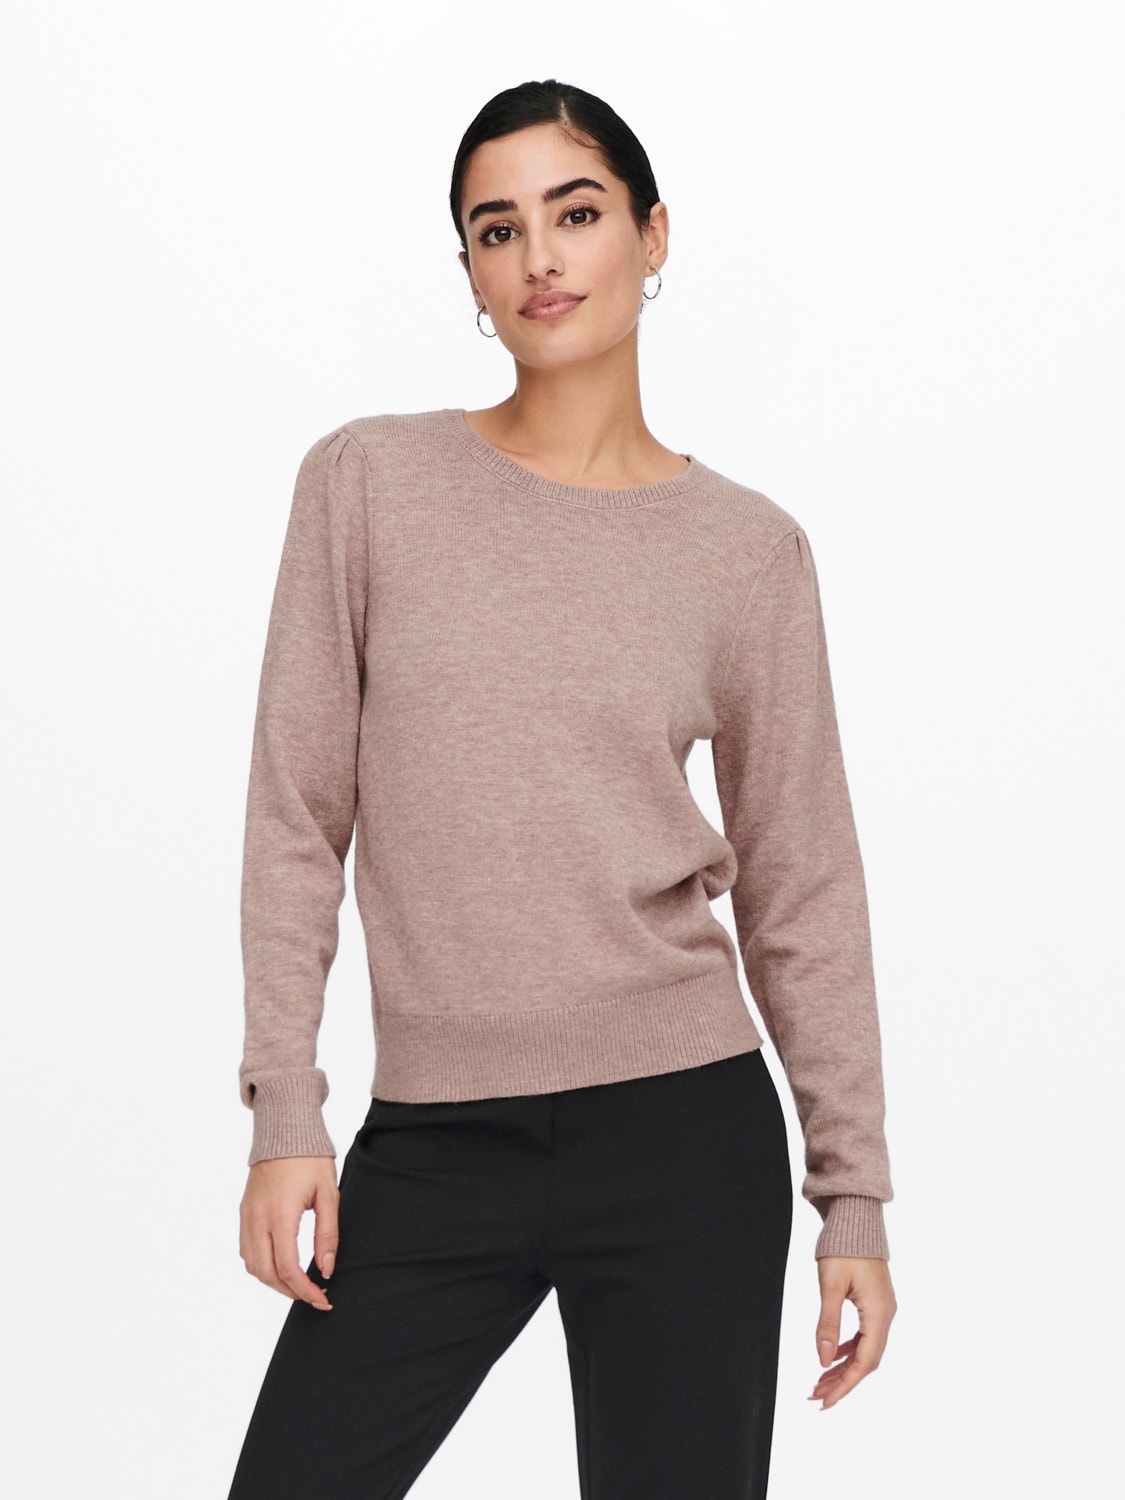 ONLY O-hals Pullover -Woodrose - 15237060